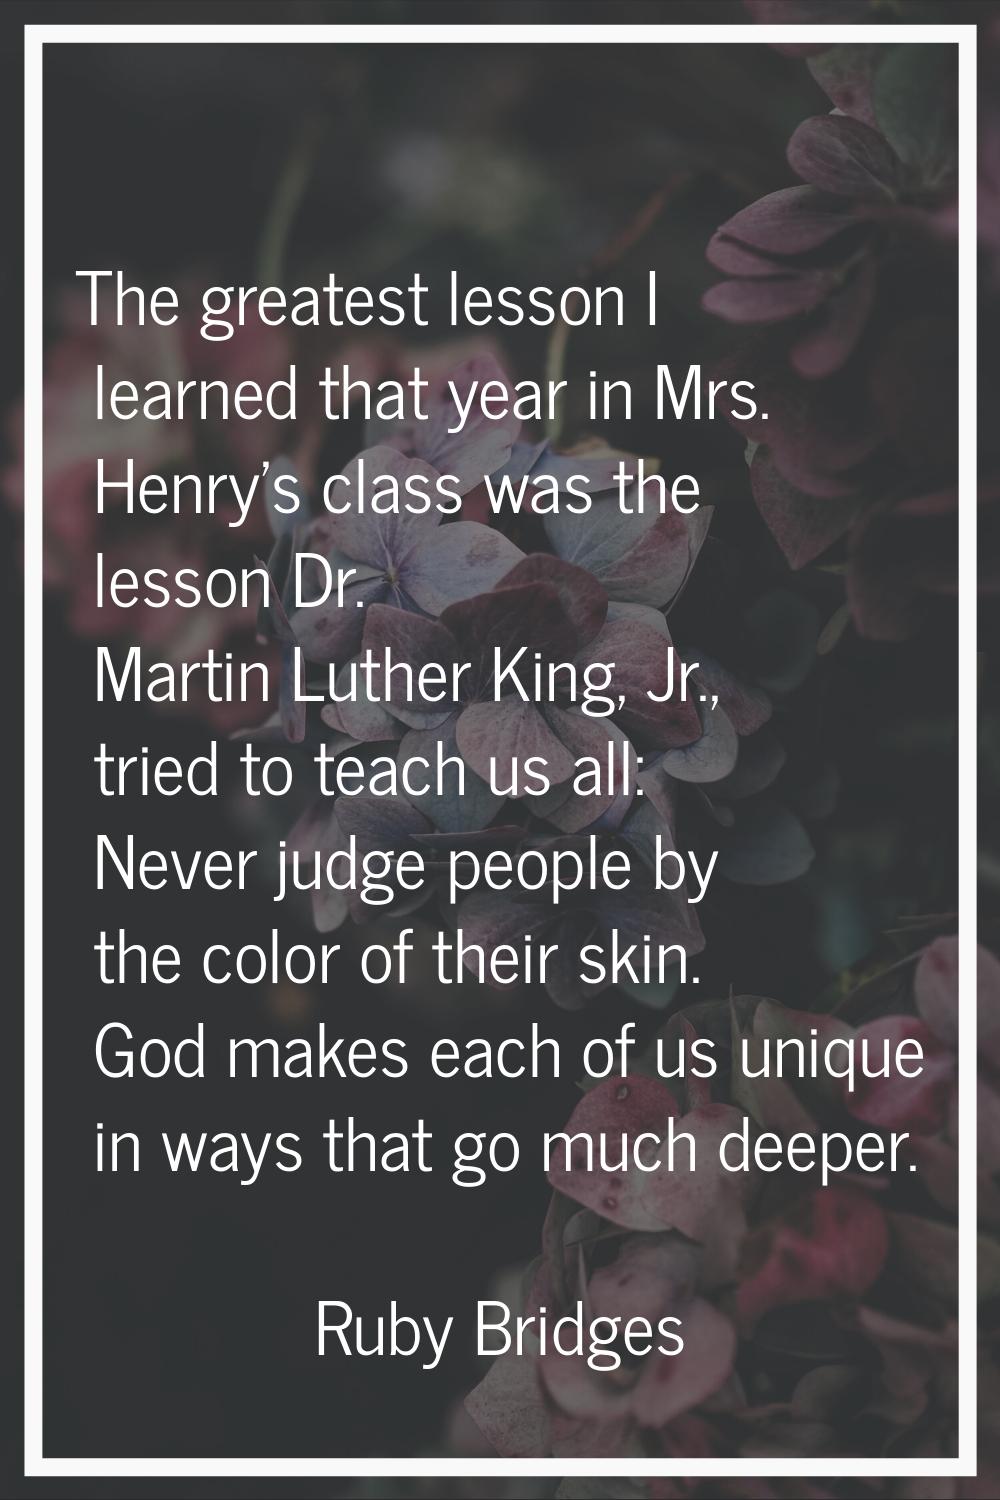 The greatest lesson I learned that year in Mrs. Henry's class was the lesson Dr. Martin Luther King